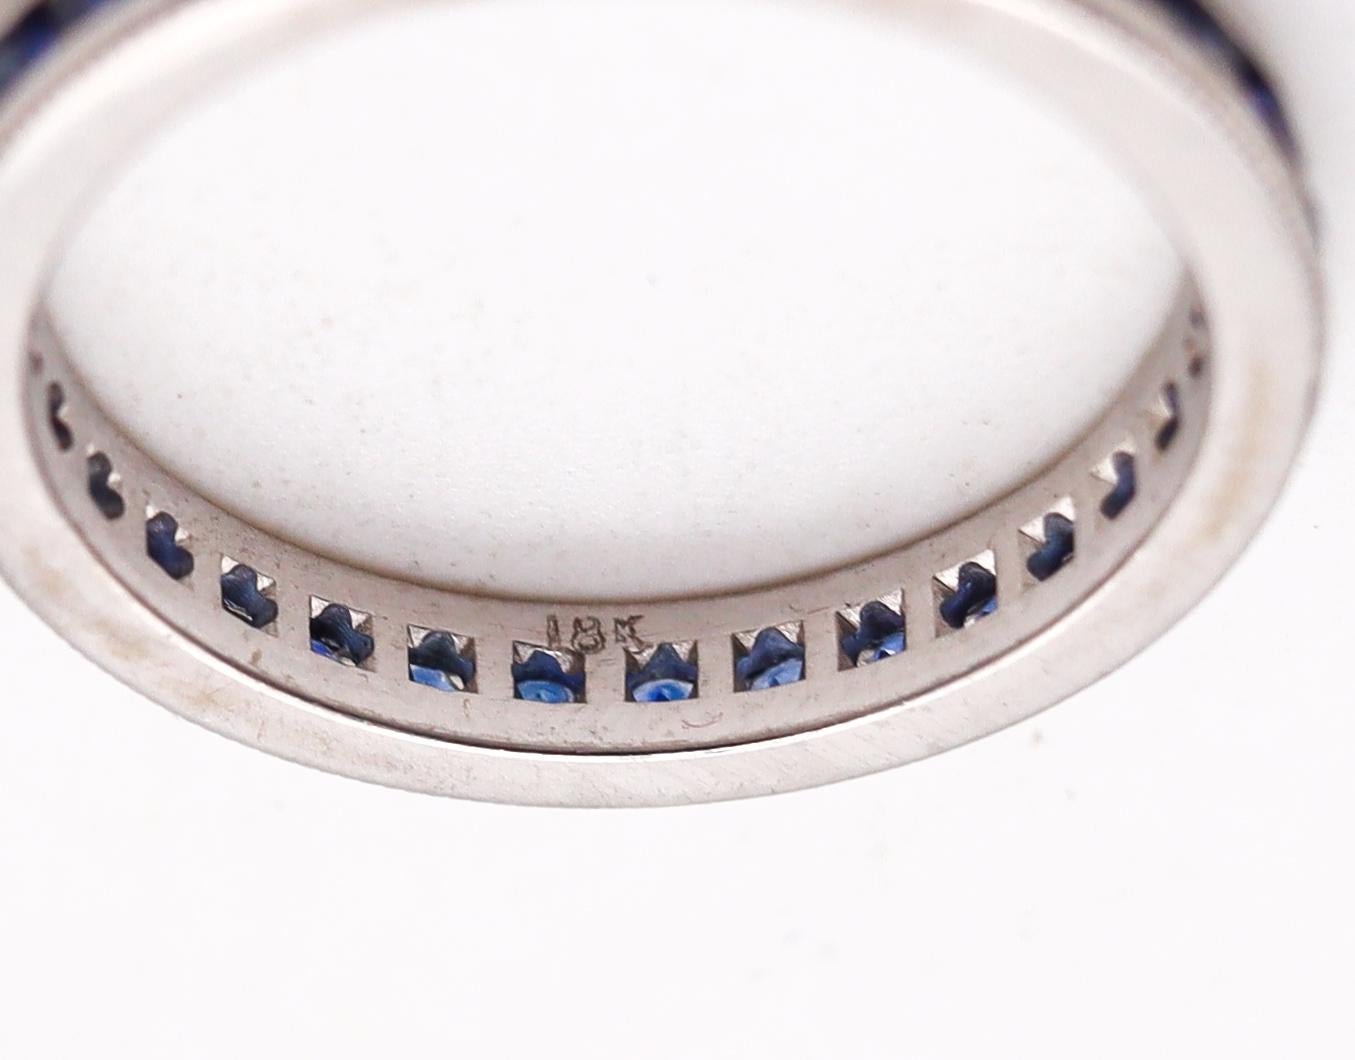 Brilliant Cut Eternity Band Ring in 18Kt White Gold with 1.22 Cts in Vivid Blue Sapphires For Sale